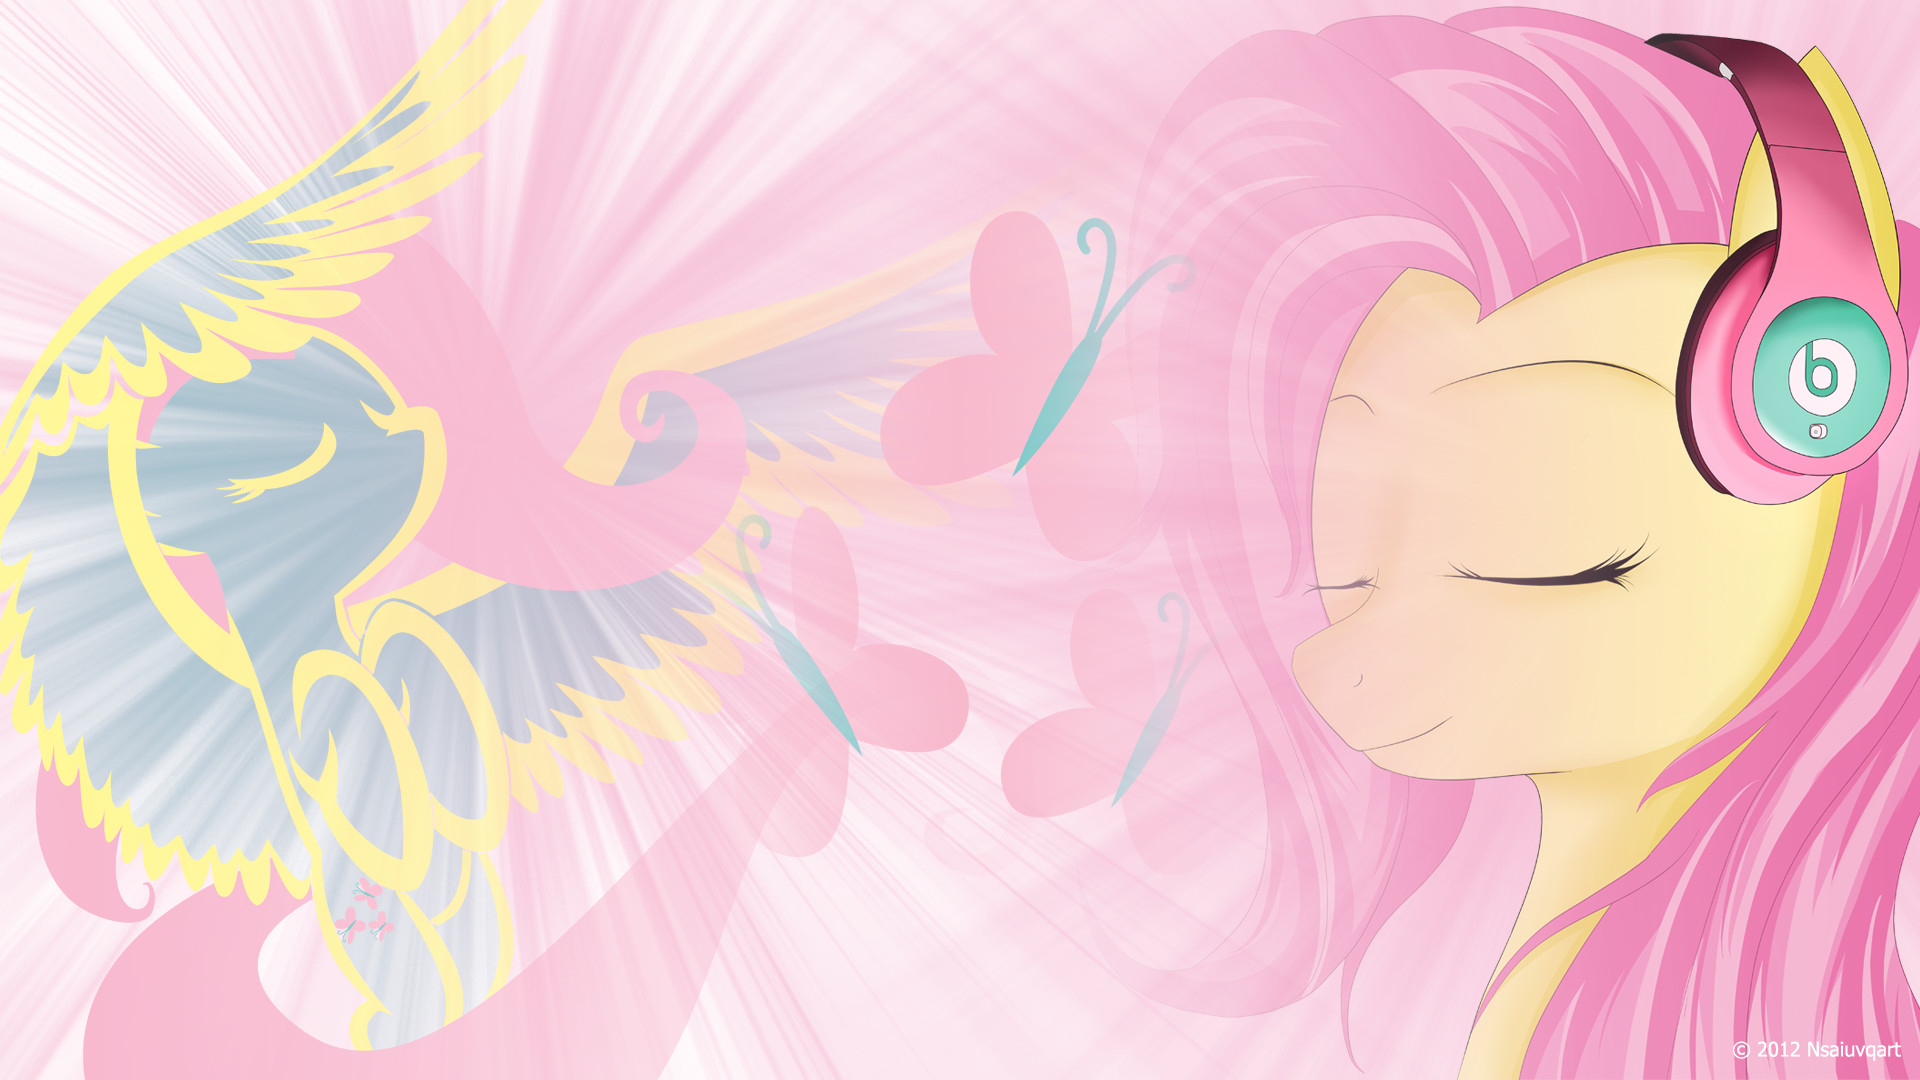 1920x1080 Fluttershy likes listening to music Wallpaper by nsaiuvqart